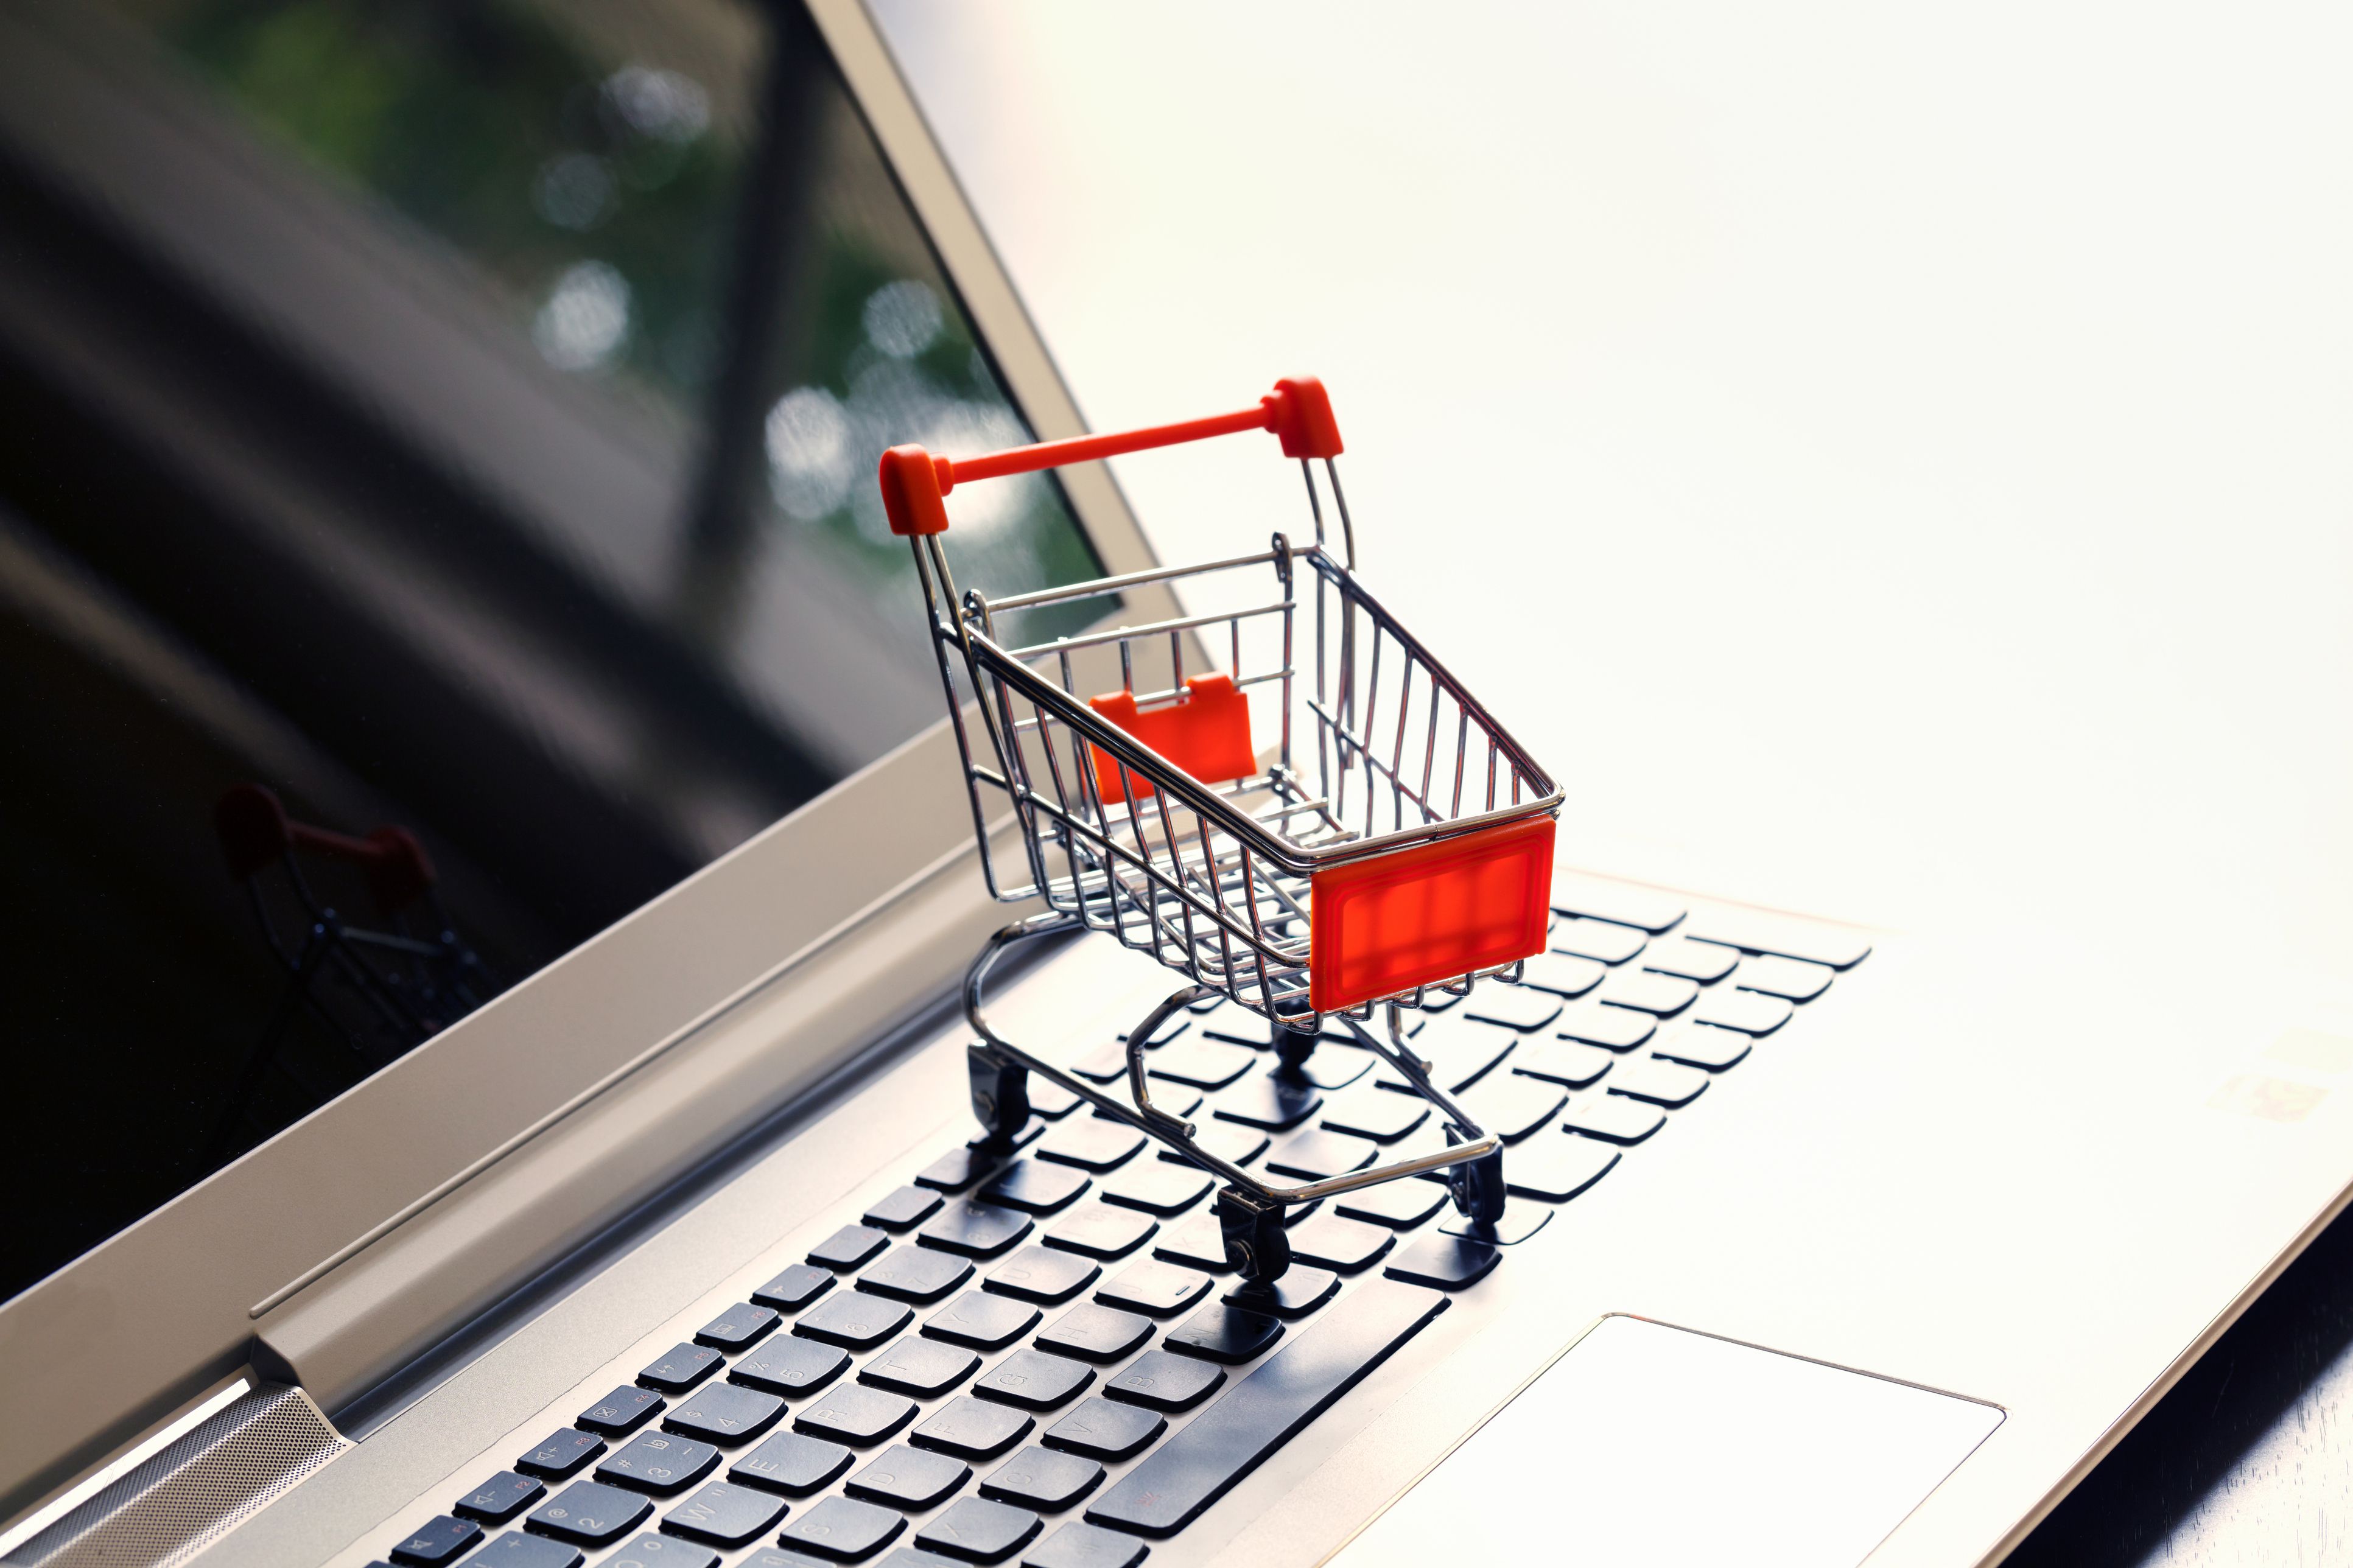 Learn About Using the eBay Shopping Cart